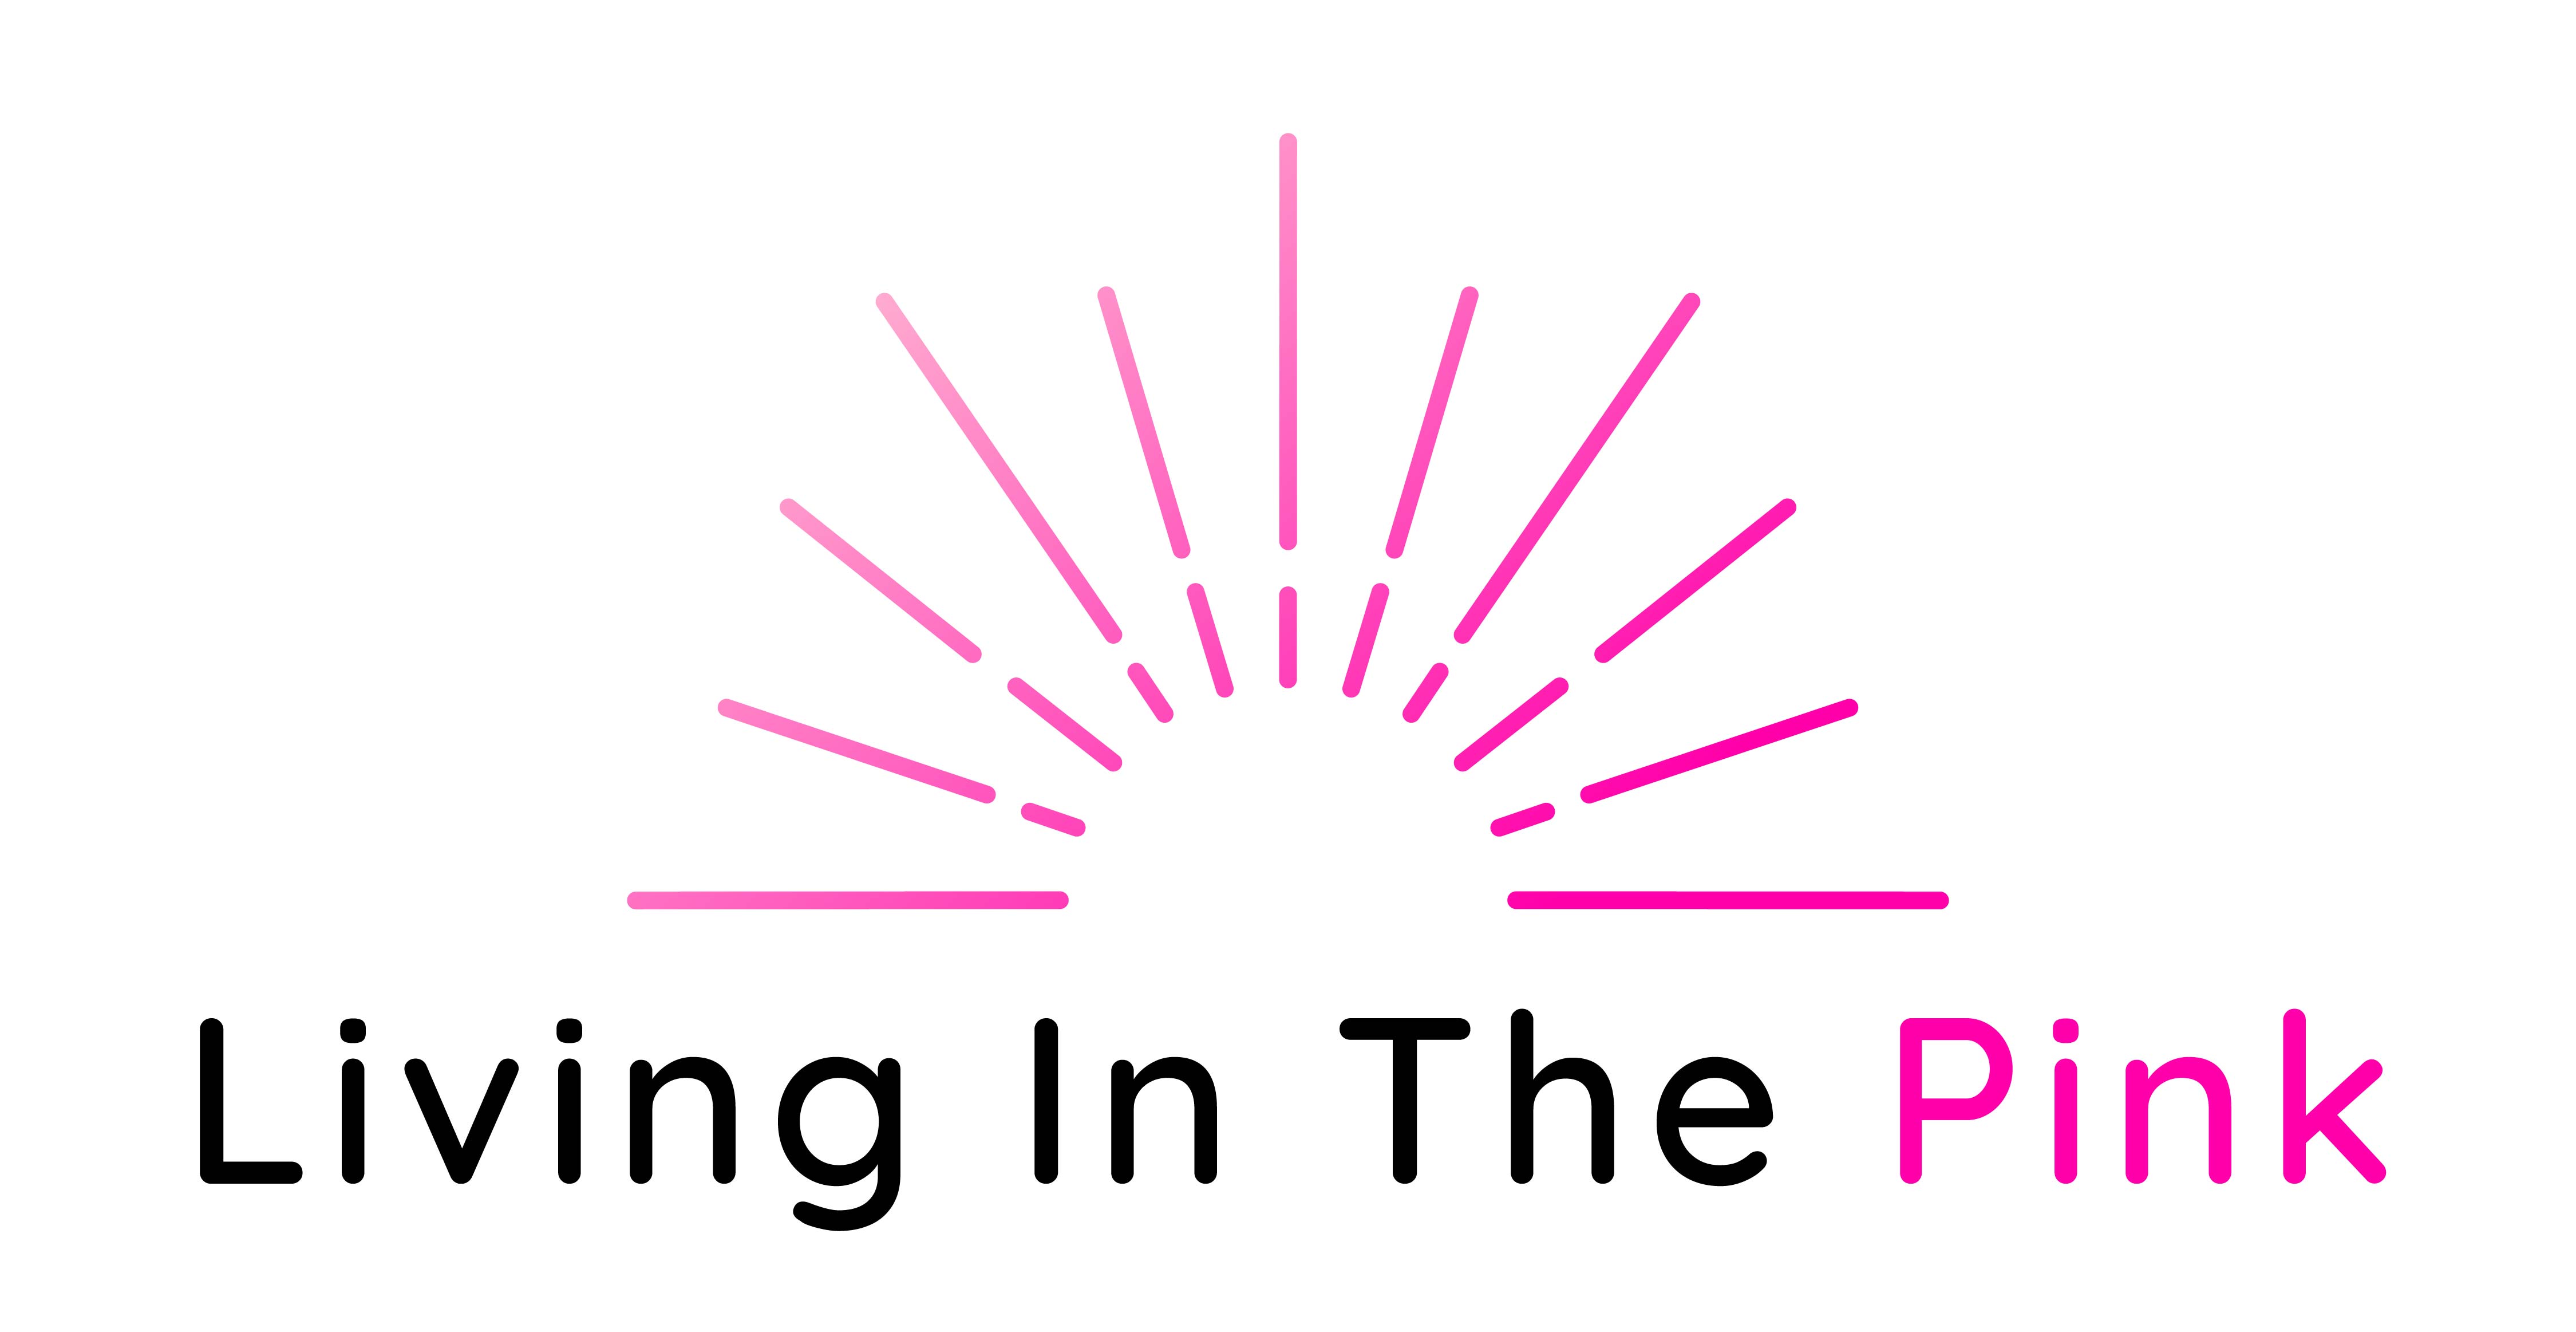 Living in the Pink CIC - Offering Mindfulness Sessions Online and Singing/Music Making for Wellbeing in Person